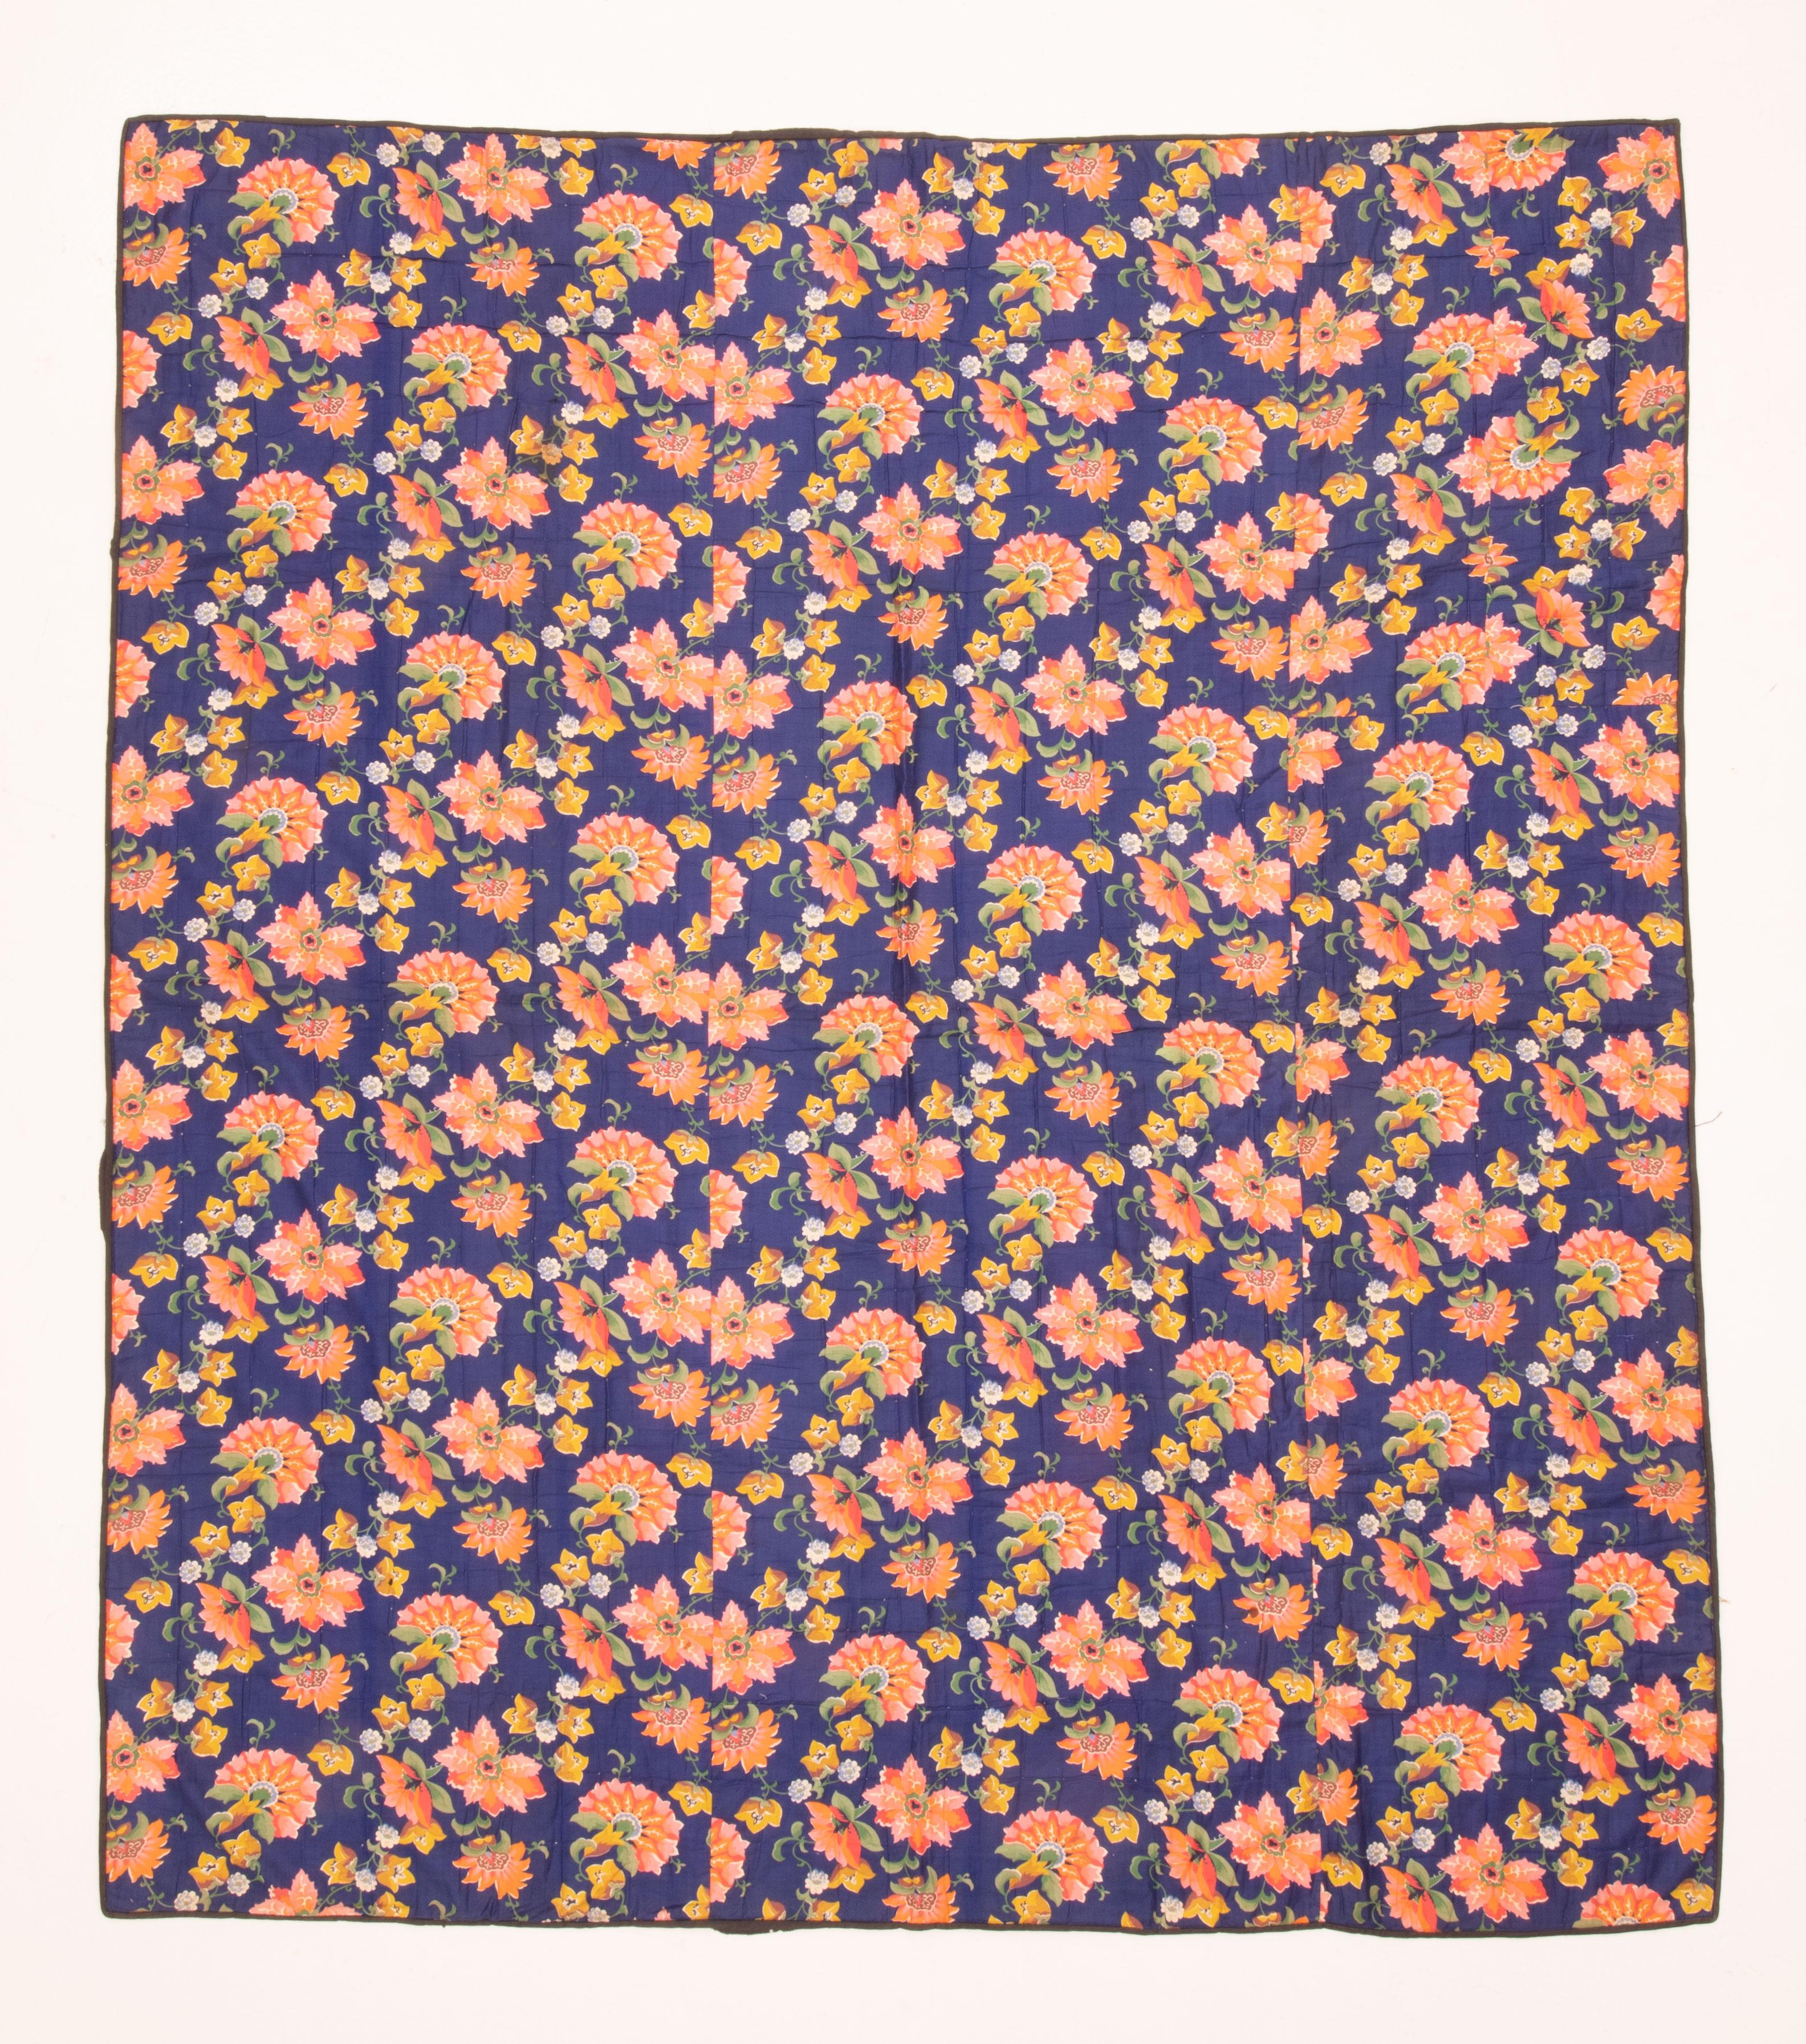 These type of Russian roller printed prints that are also called 'trade cloth' since they were made for Central Asian markets. They were used to make blankets and dresses, and also used for the lining of ikat chapans.